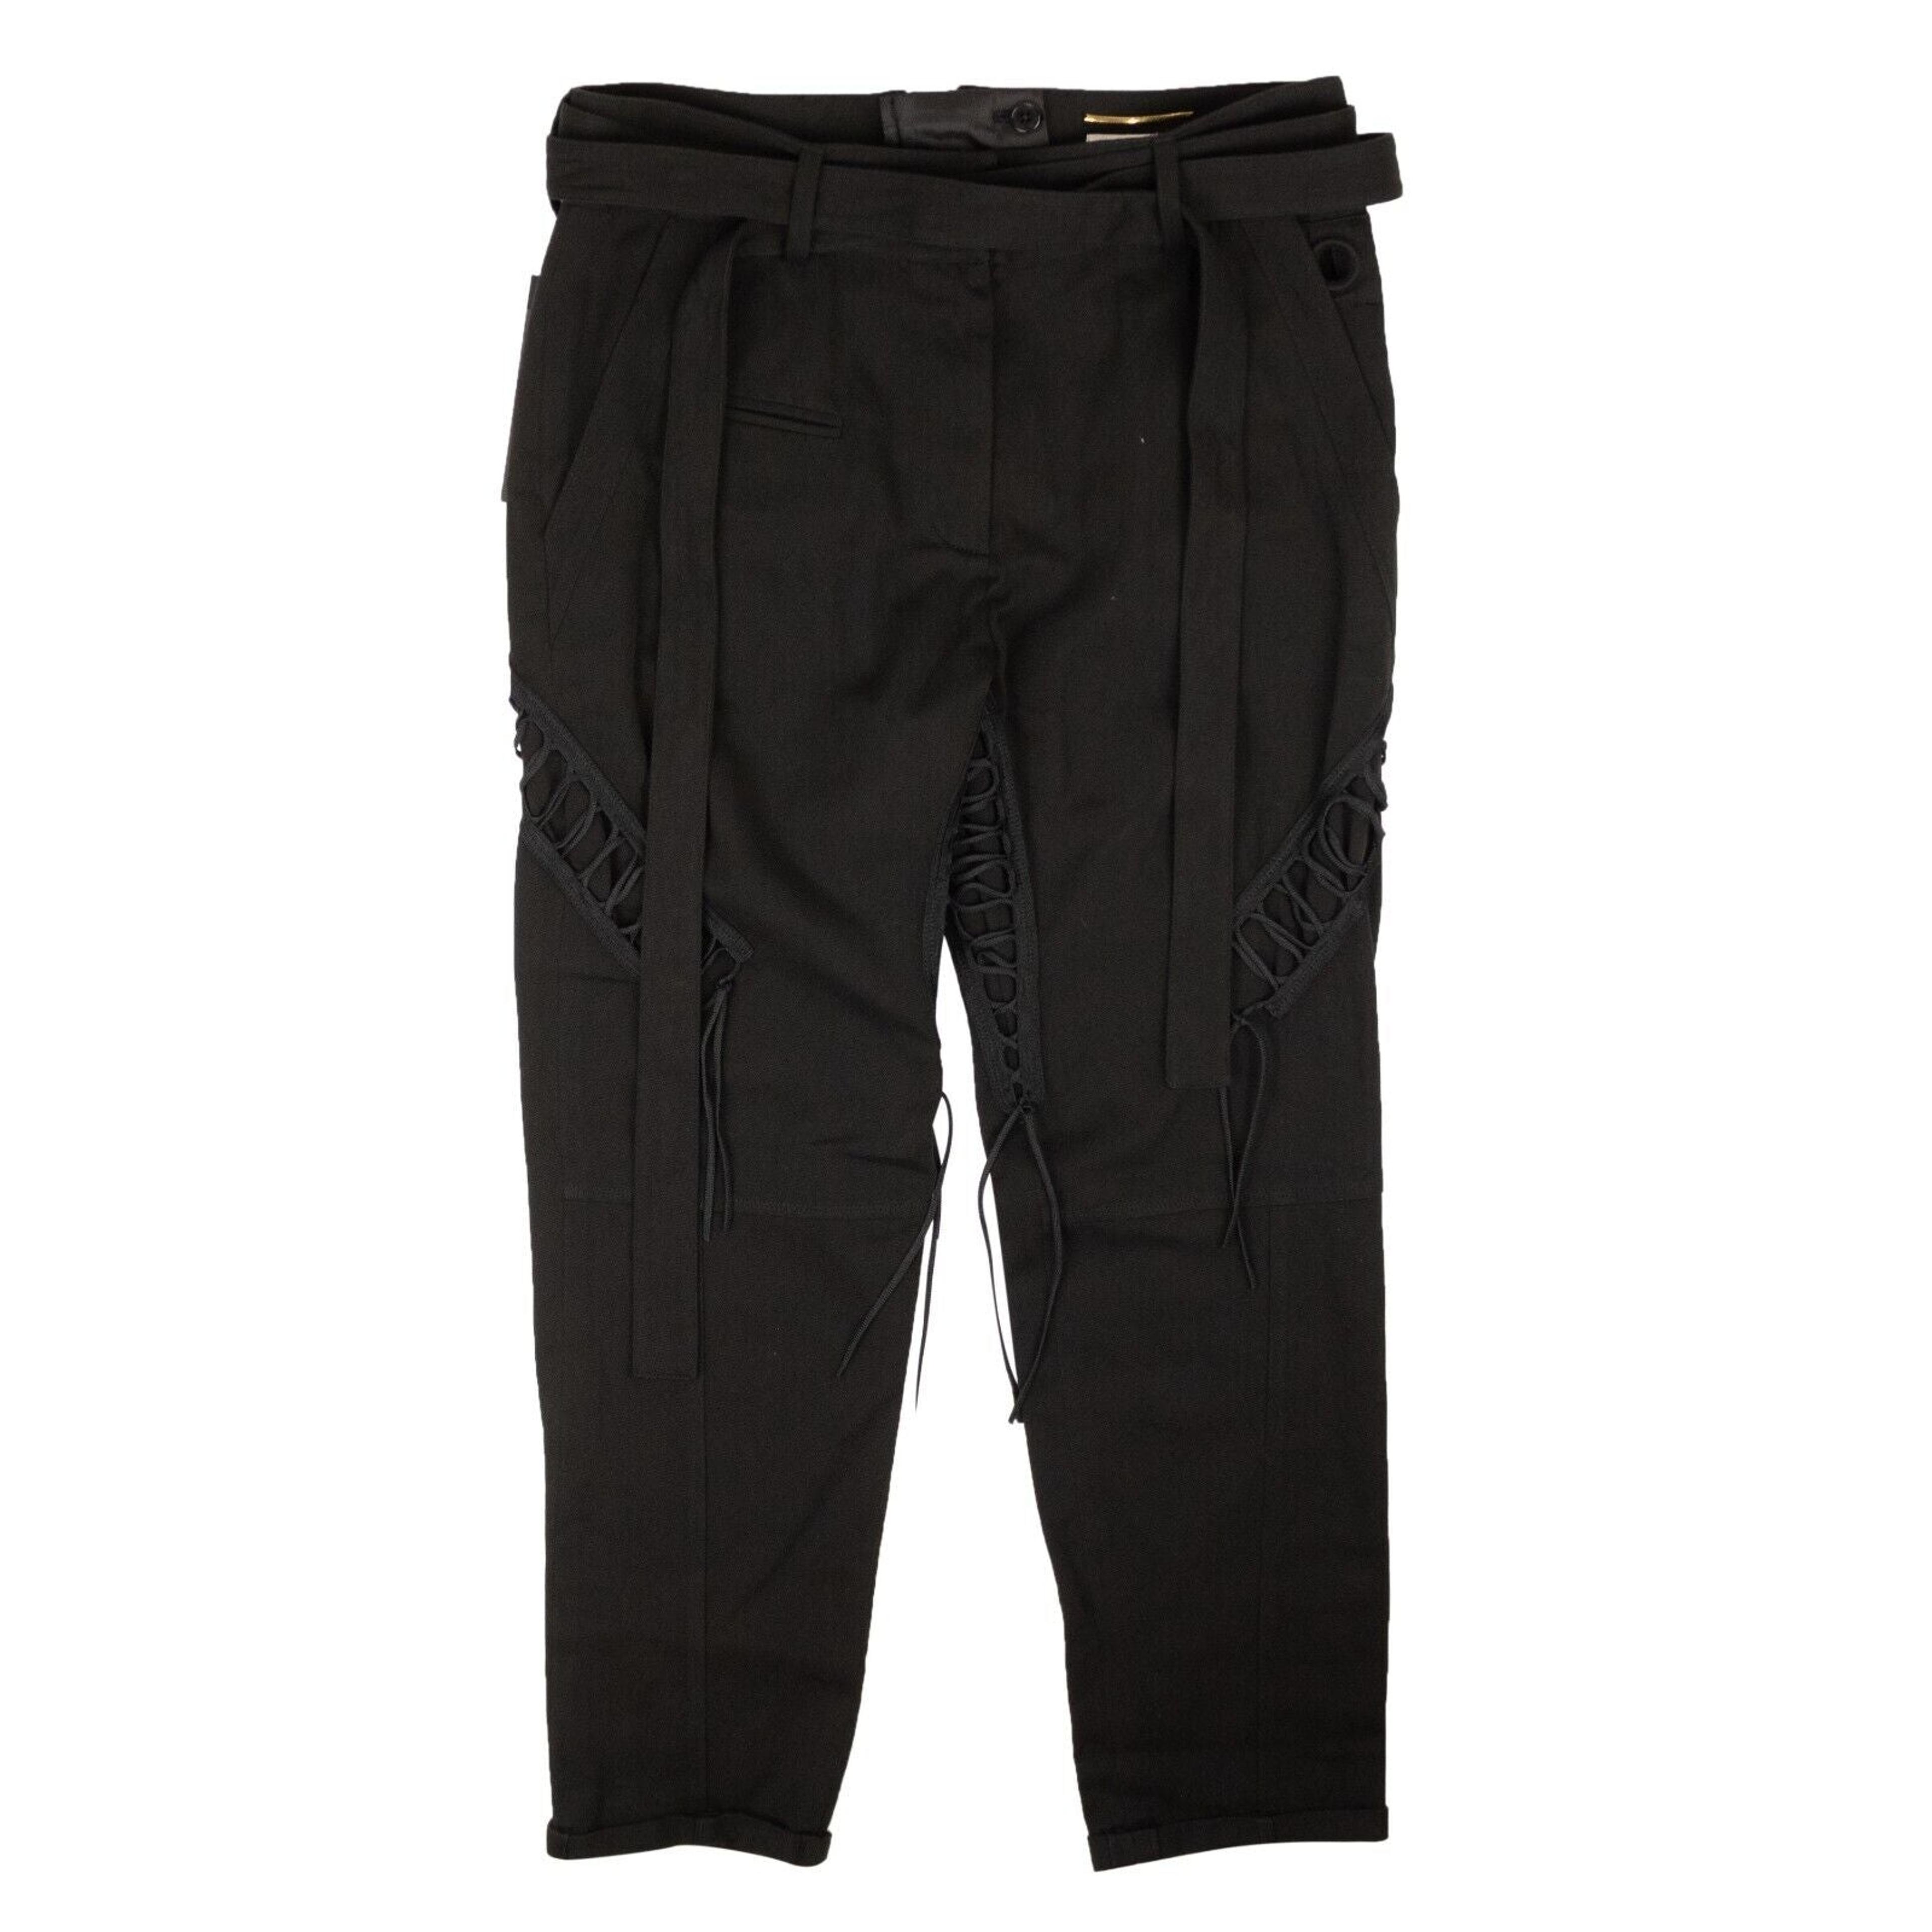 Alternate View 1 of Women's Black Lace-Up Military Pants